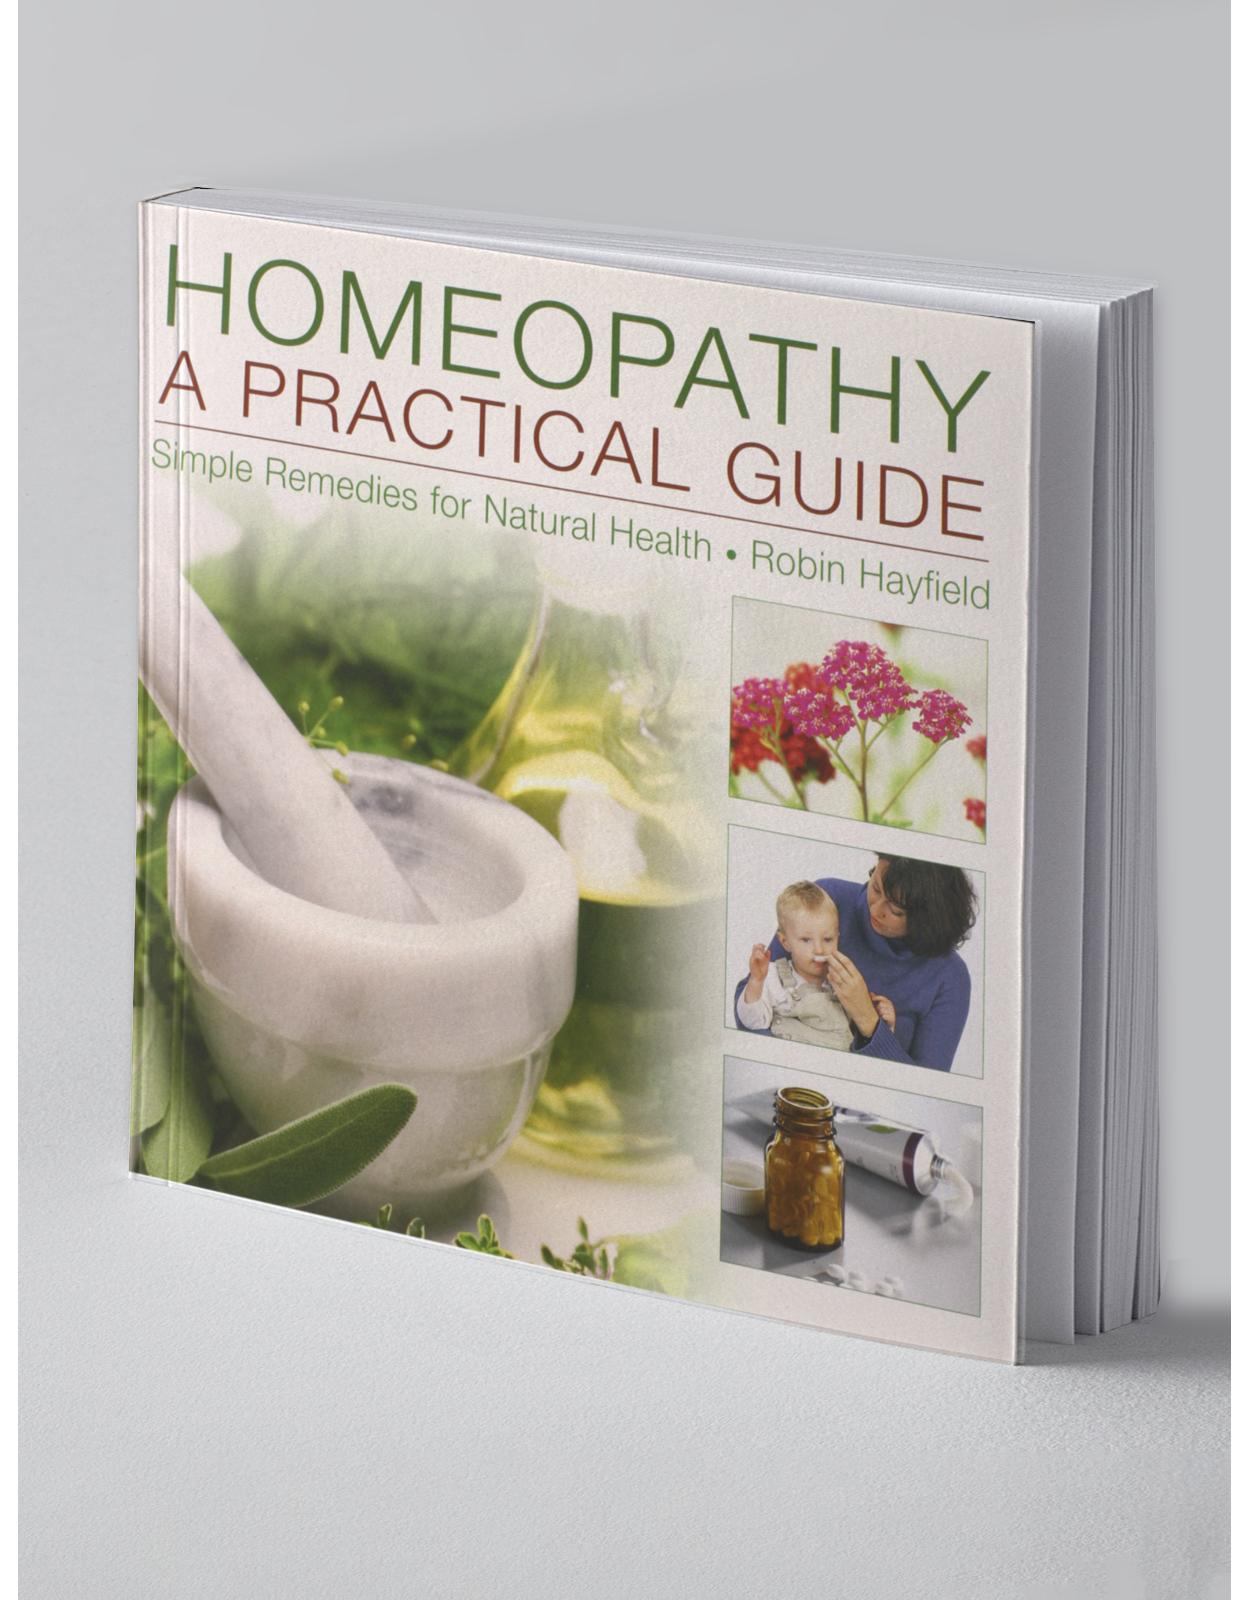 Homeopathy: A Practical Guide: Simple Remedies for Natural Health